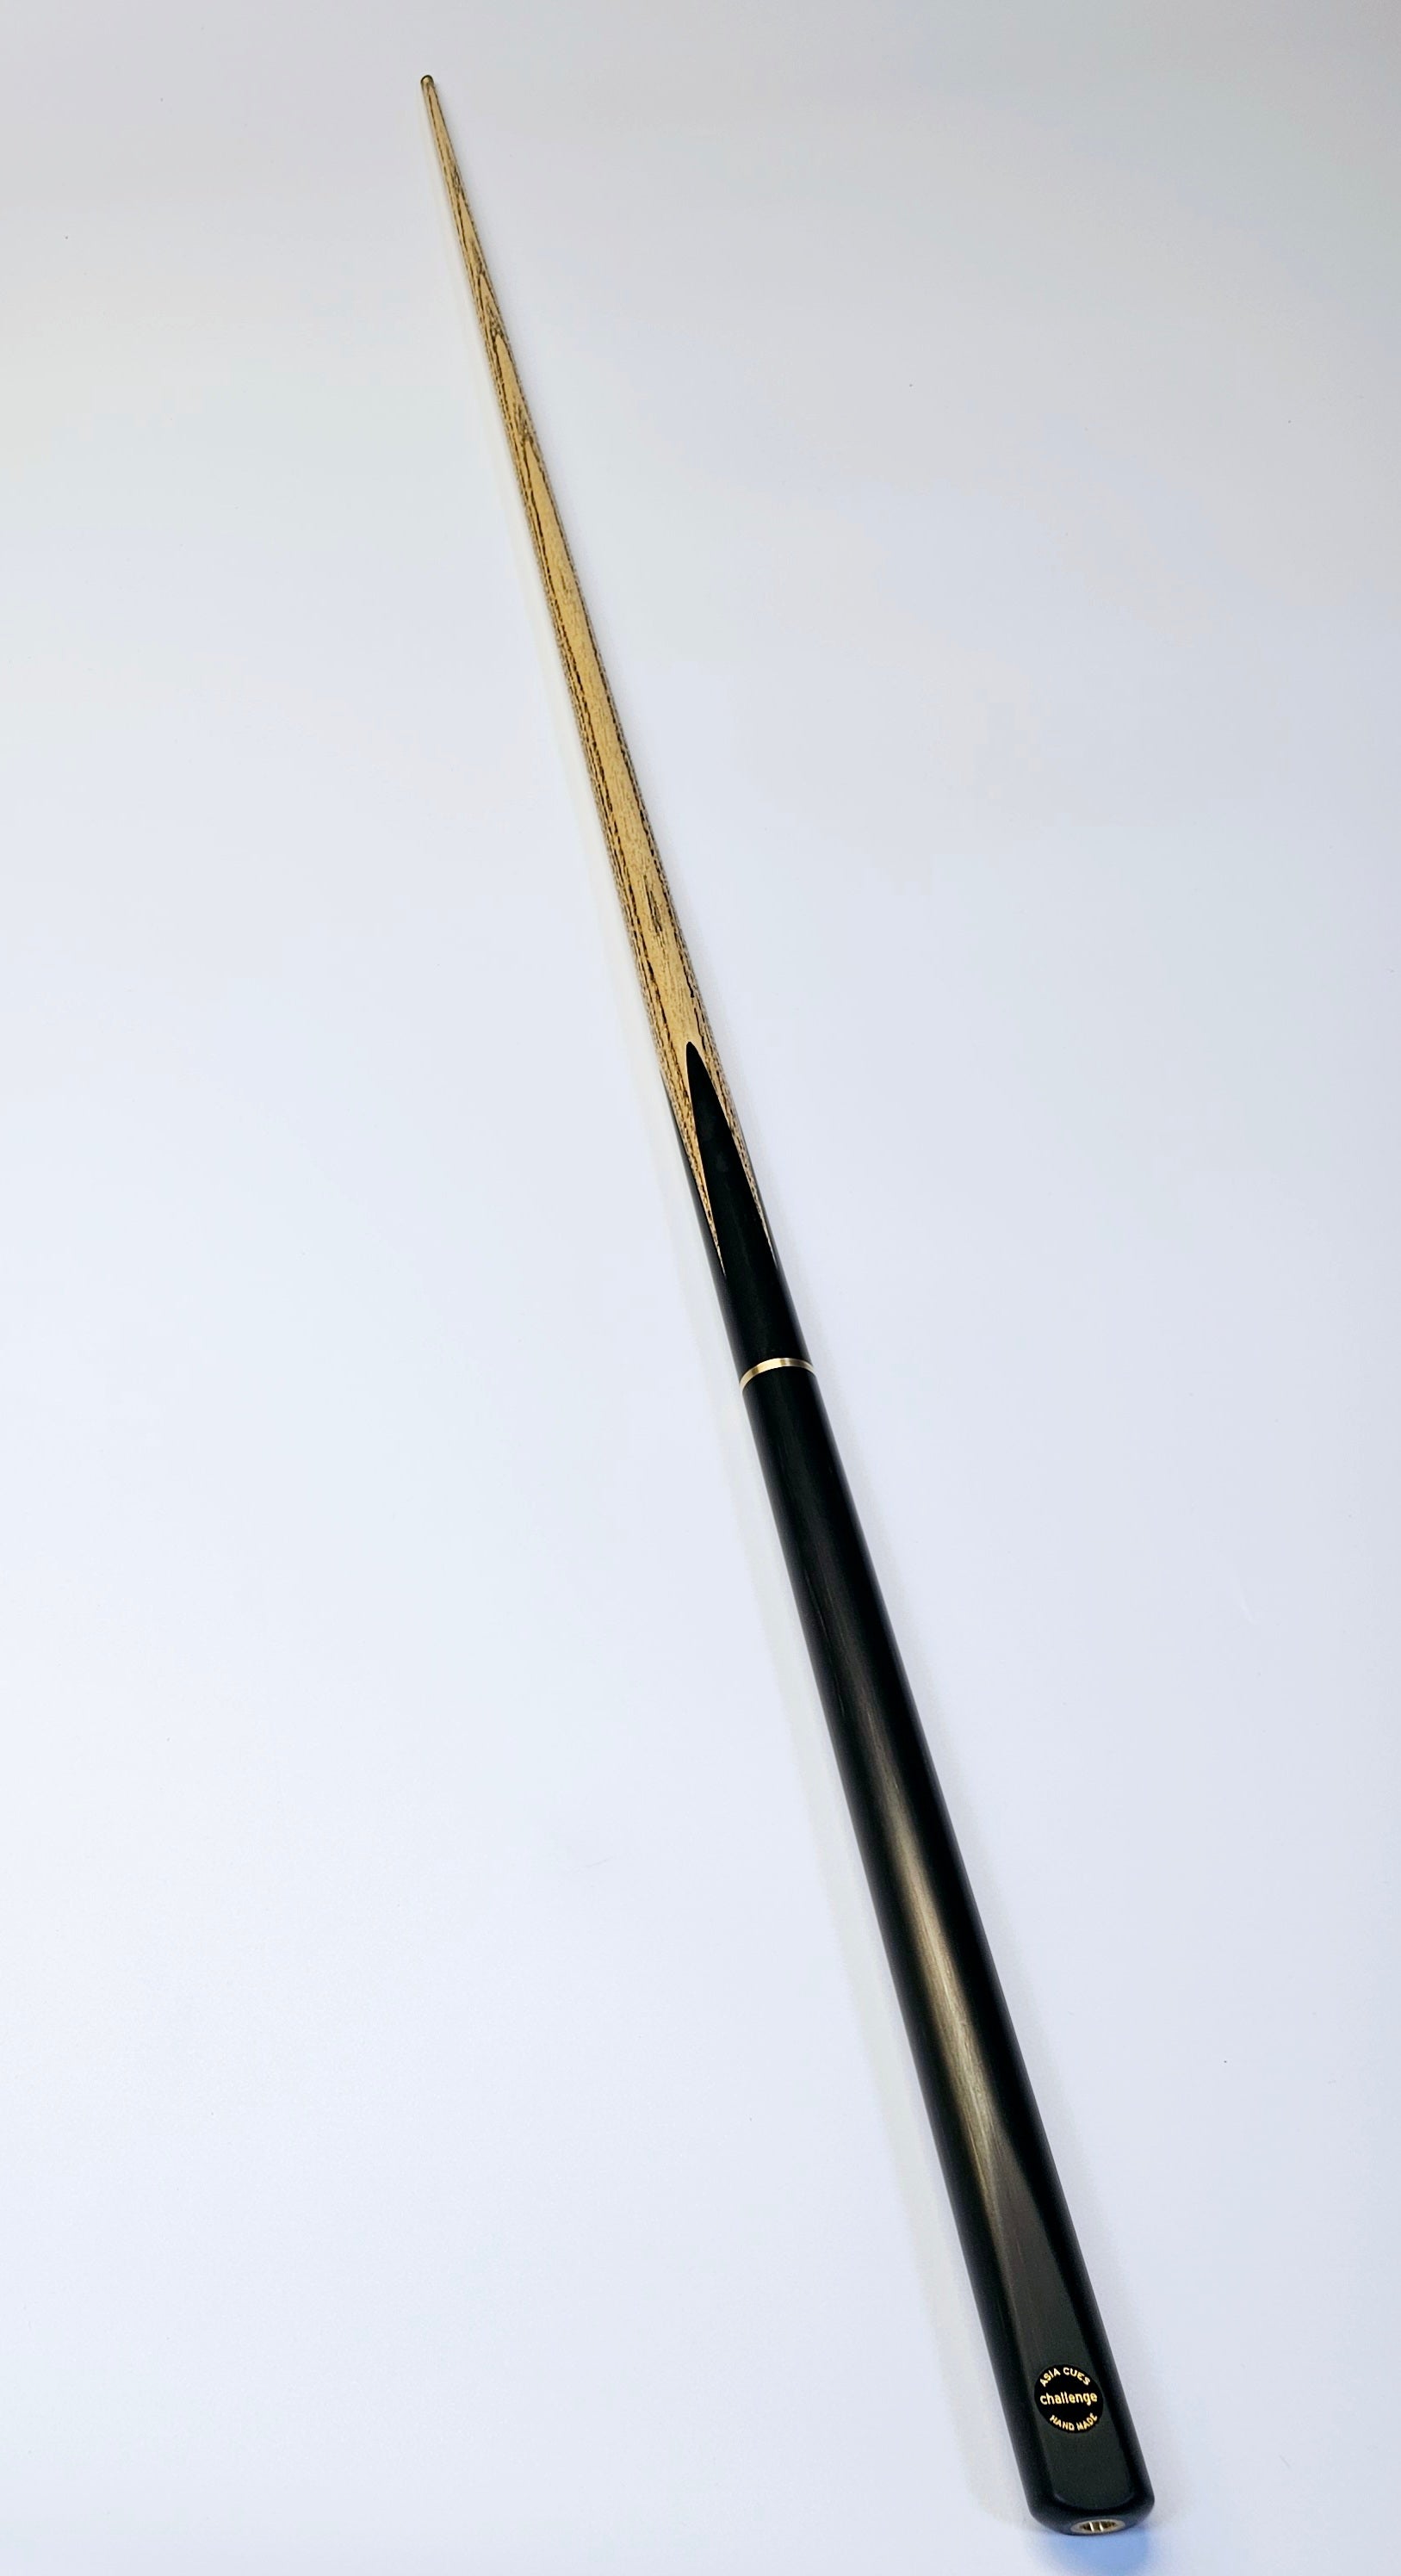 Asia Cues Challenge - 3/4 Jointed Pool Cue 8.7mm Tip, 17.4oz, 57.5"